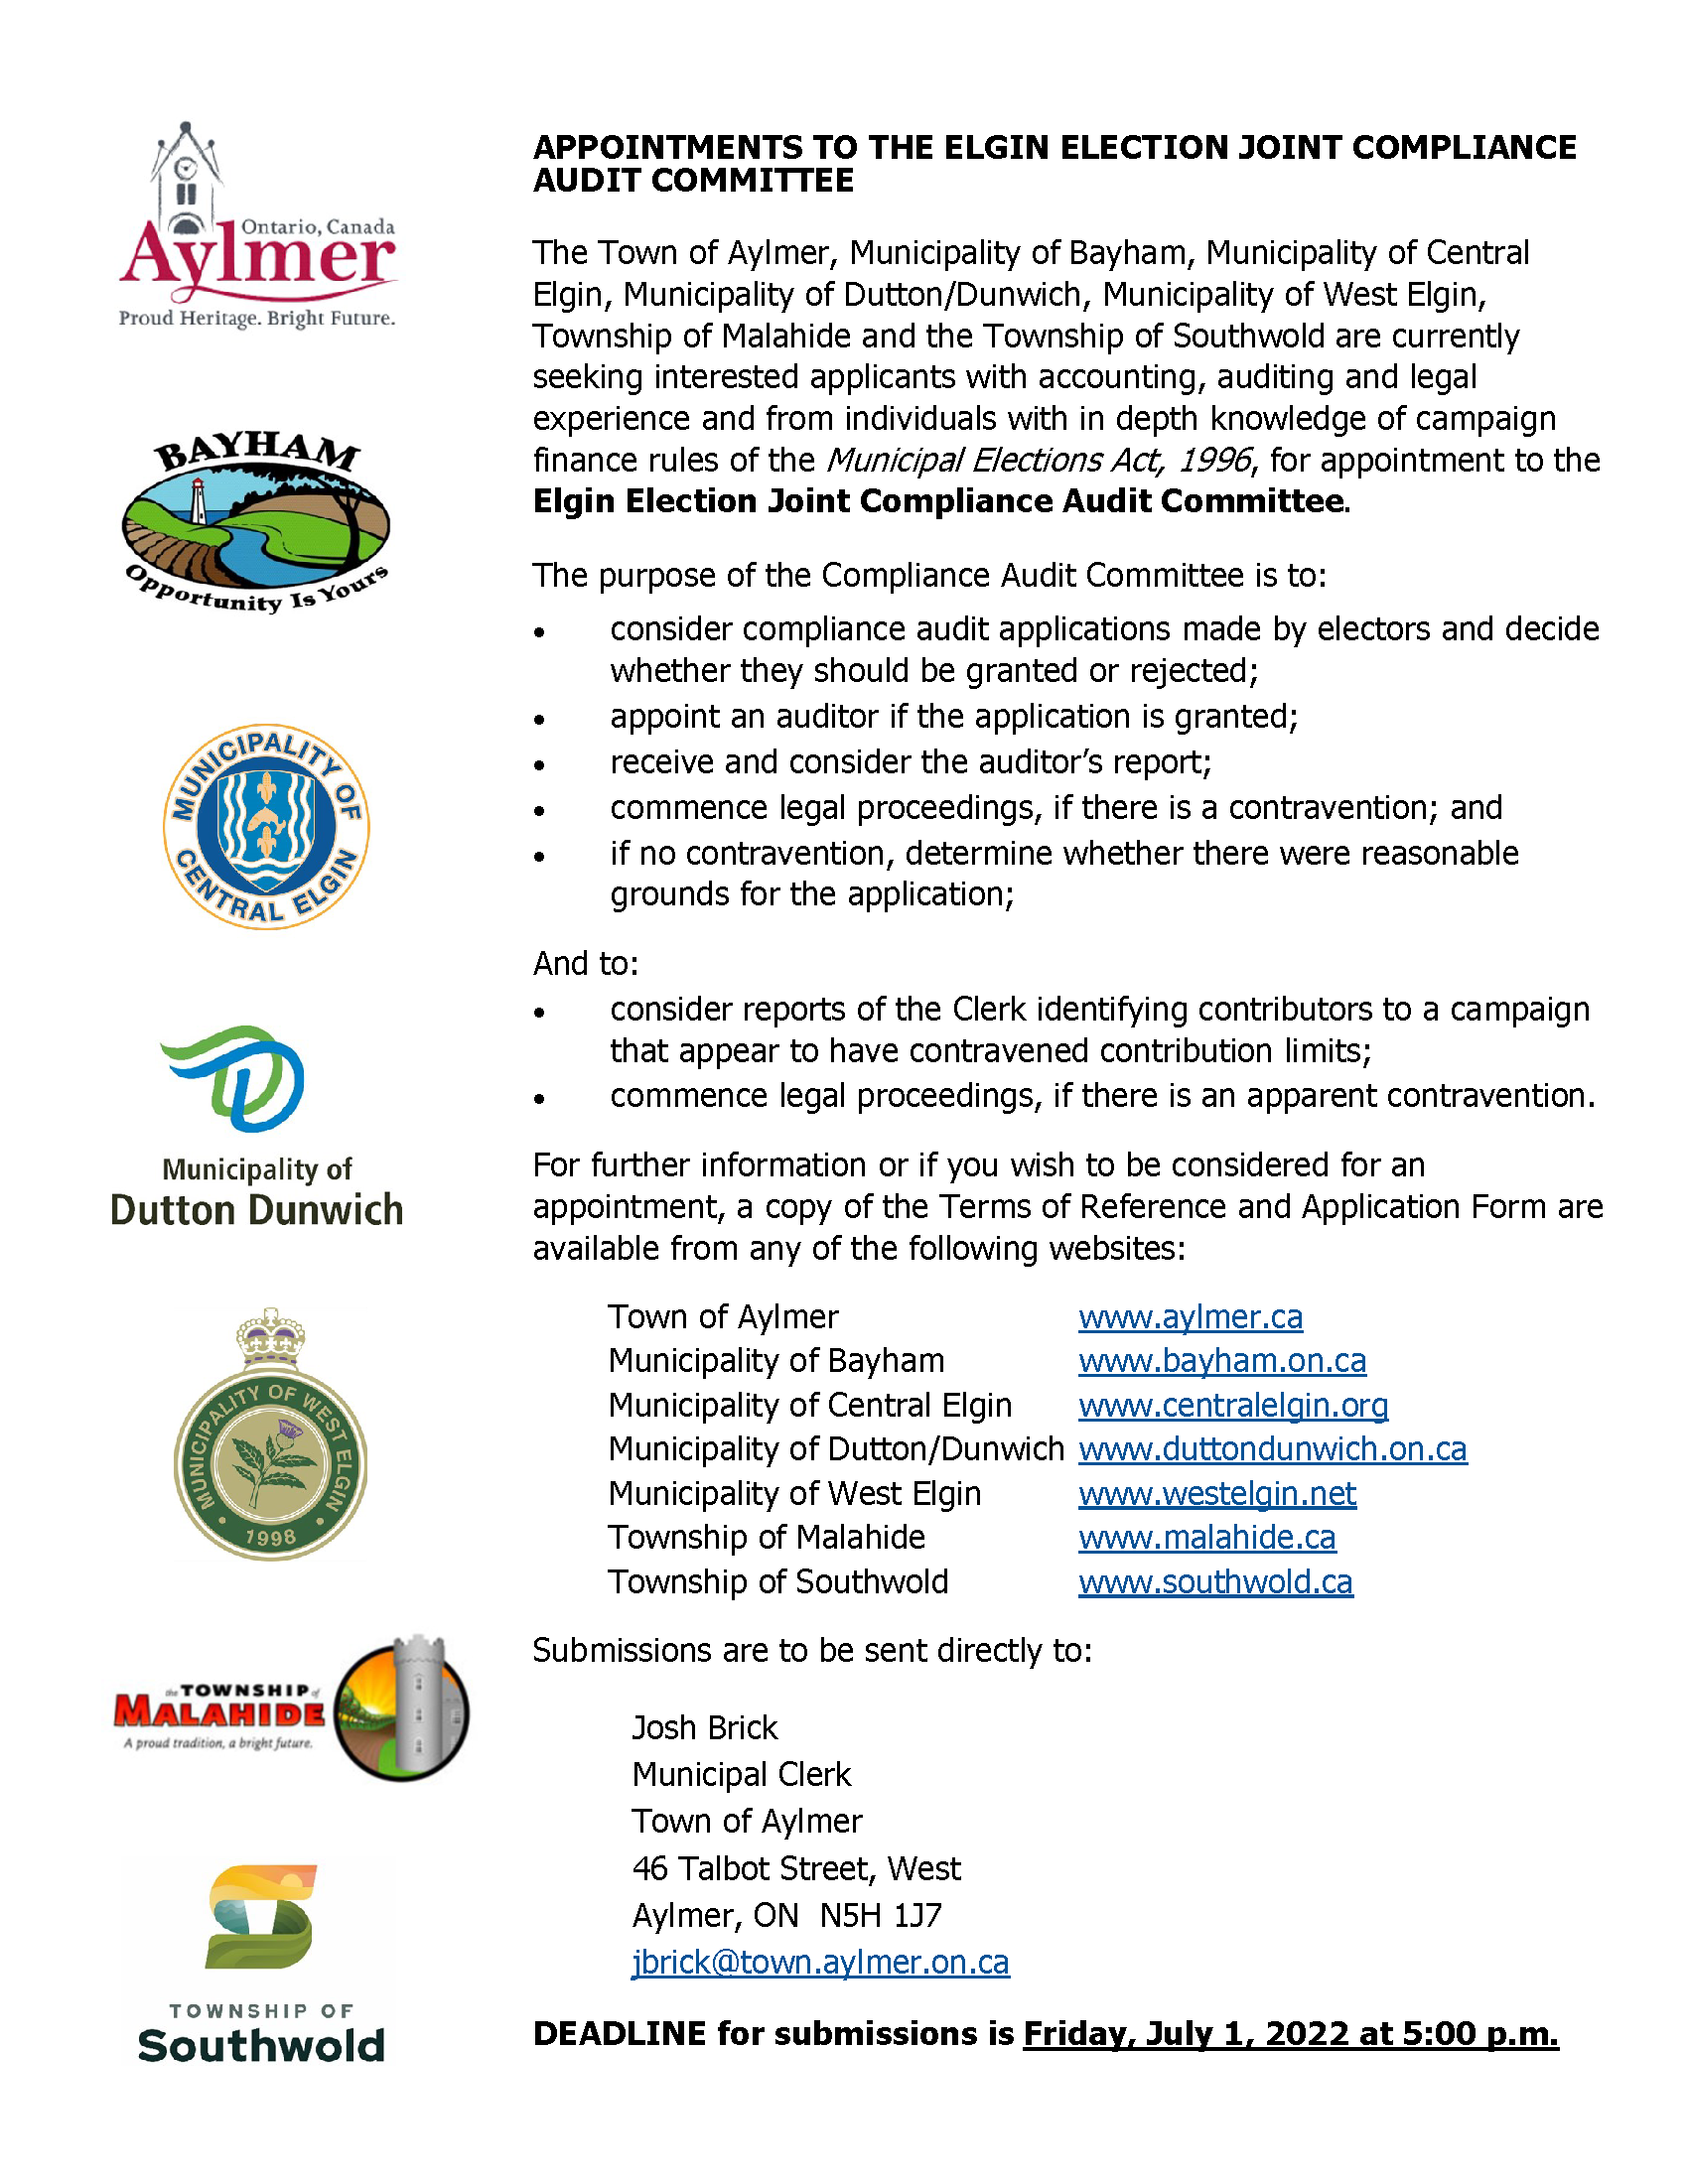 Elgin Election Joint Compliance Audit Committee Advertisement